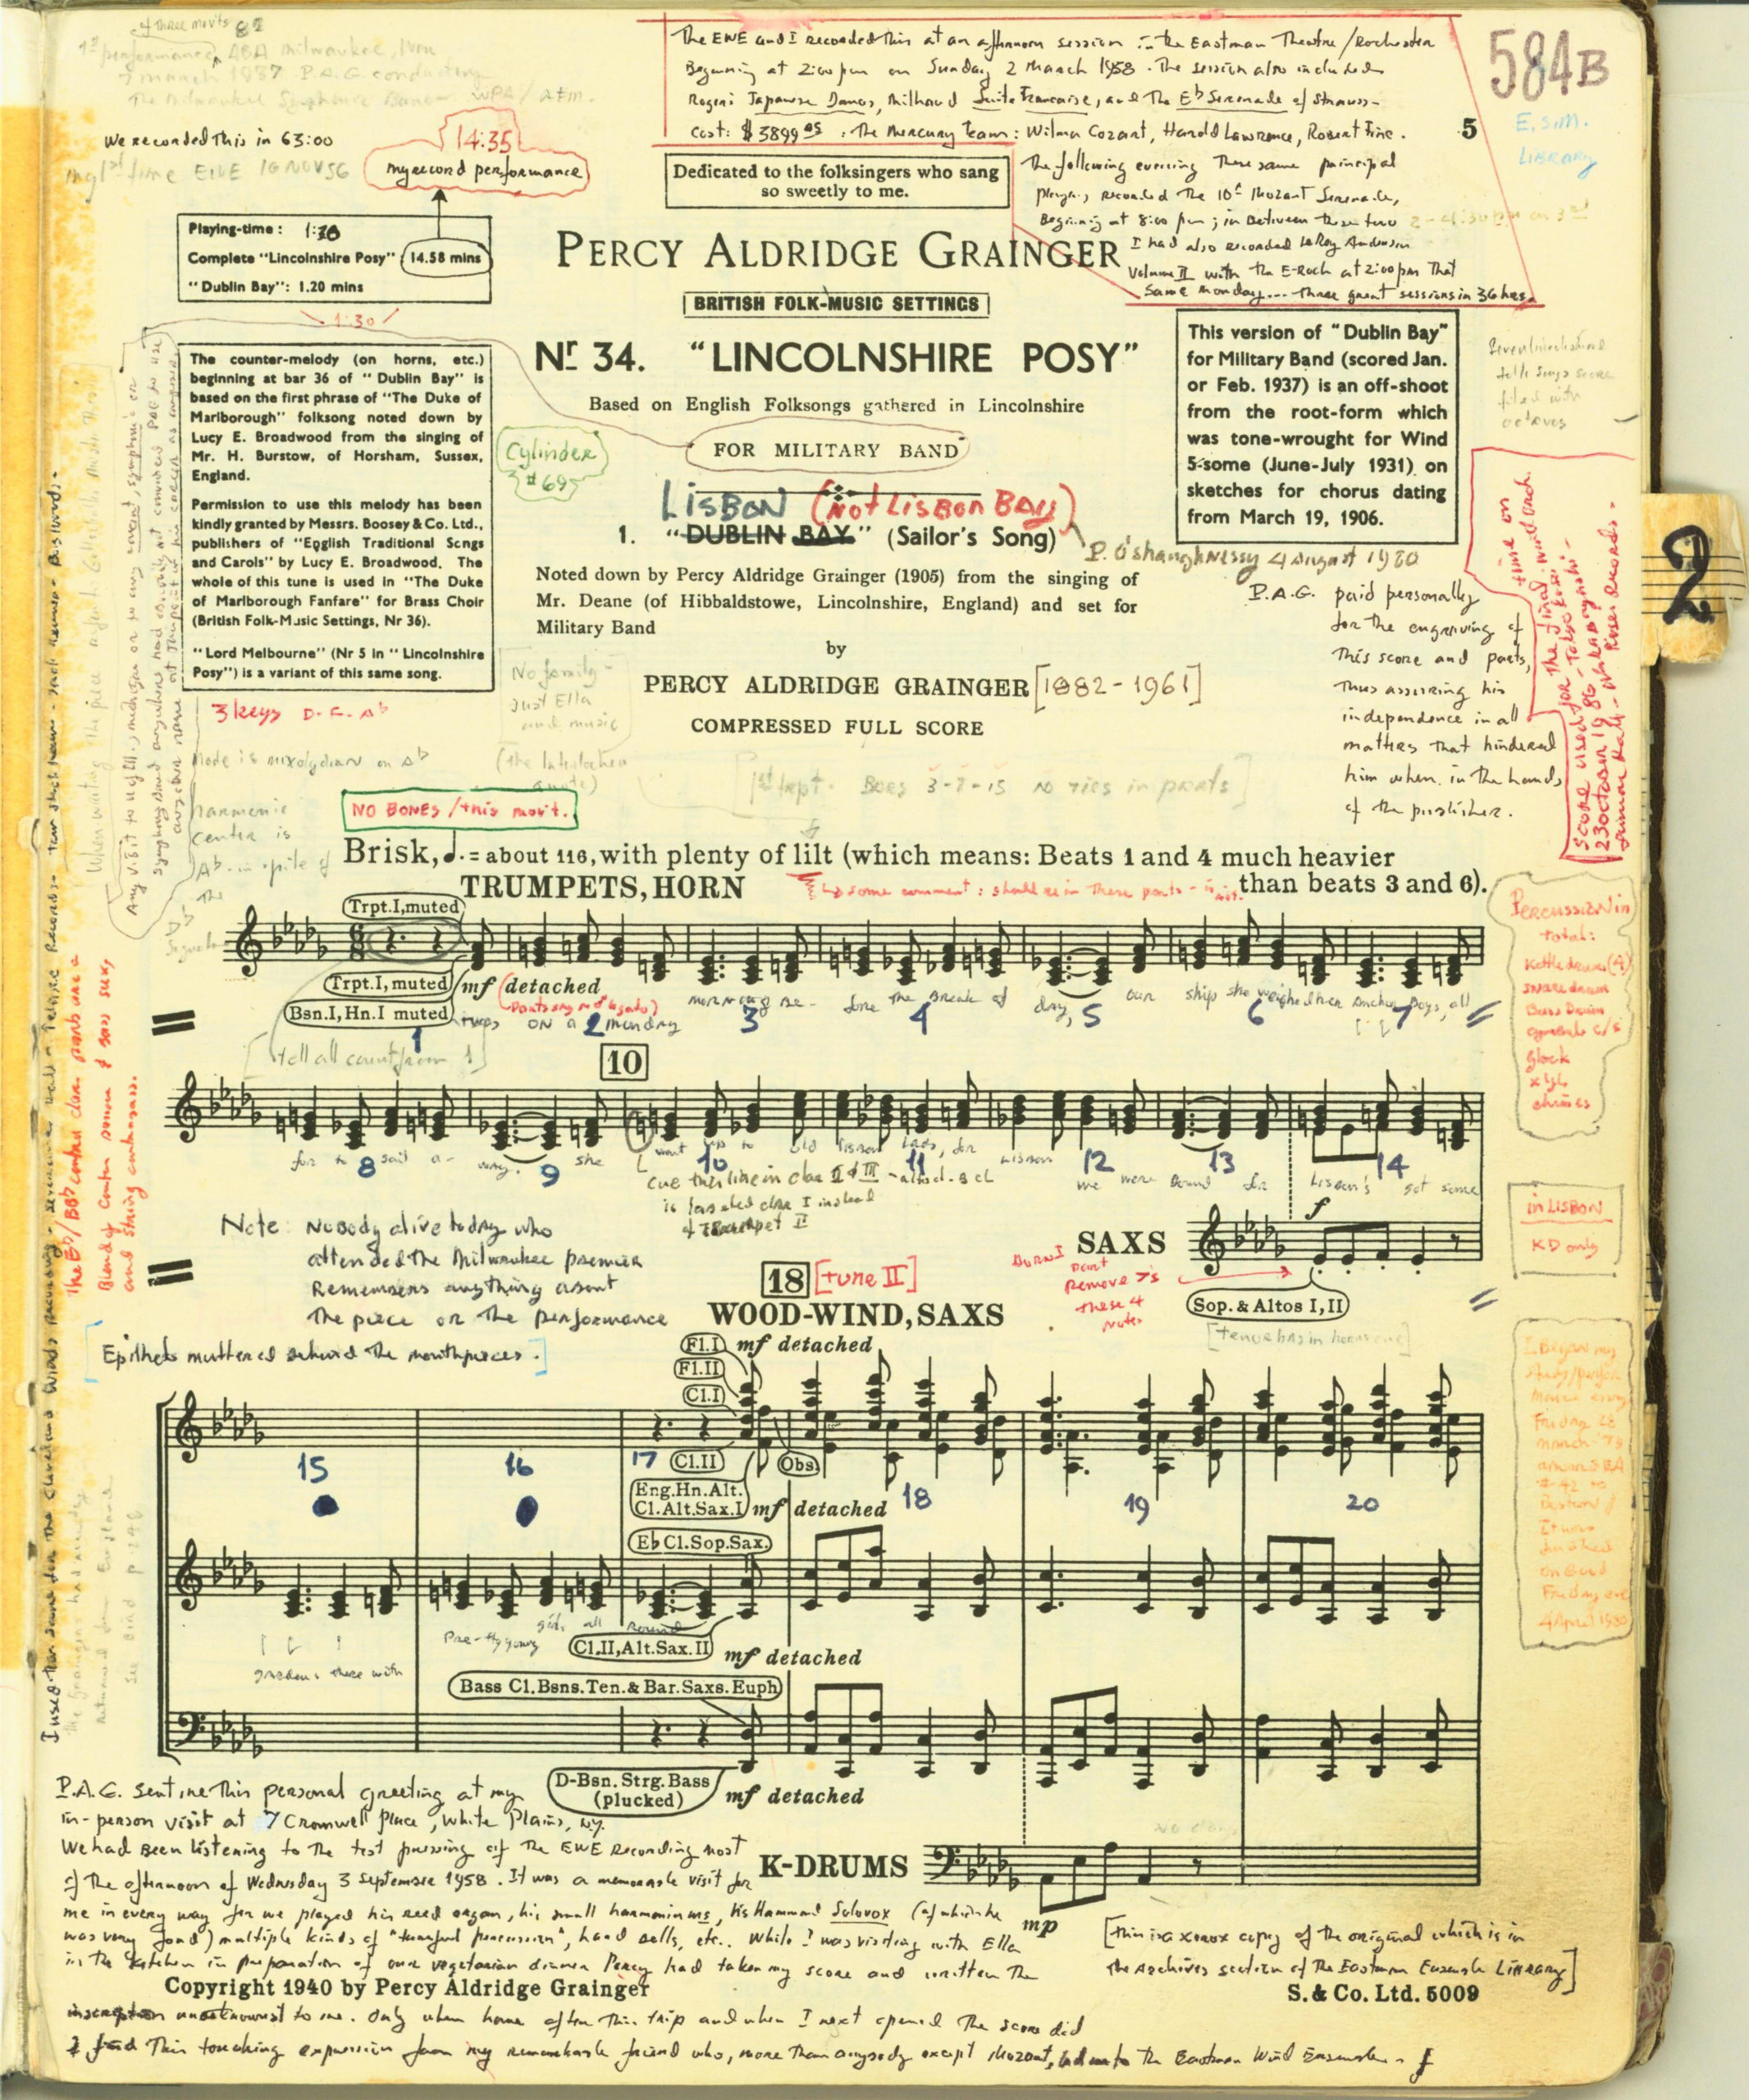 FF1083 first page of music